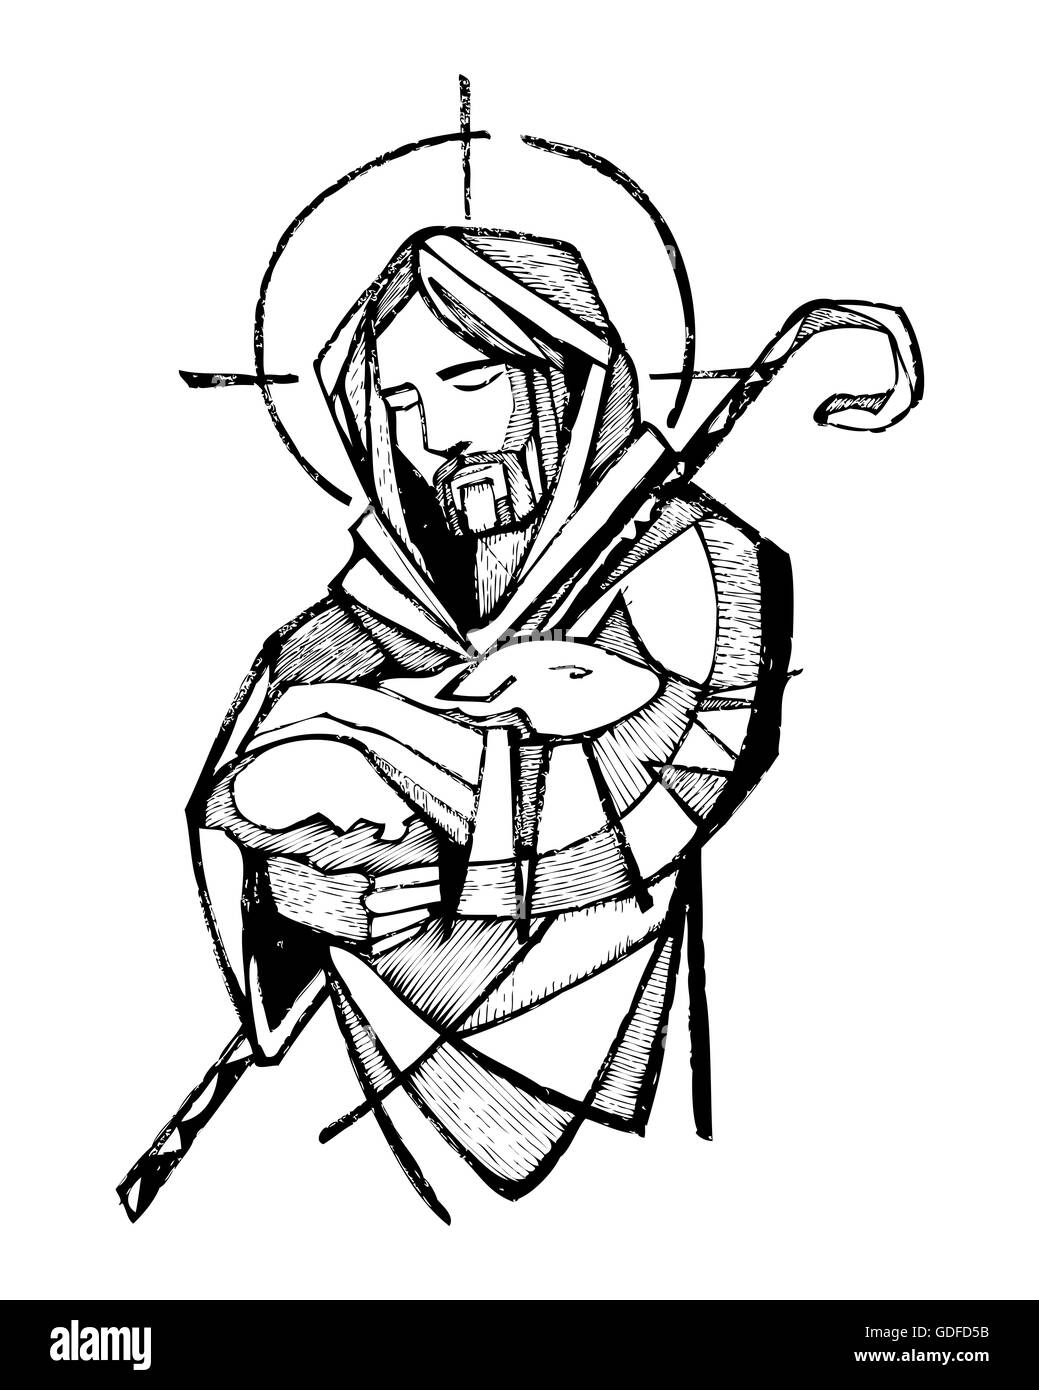 Hand drawn vector illustration or drawing of Jesus Christ as Good Shepherd Stock Photo